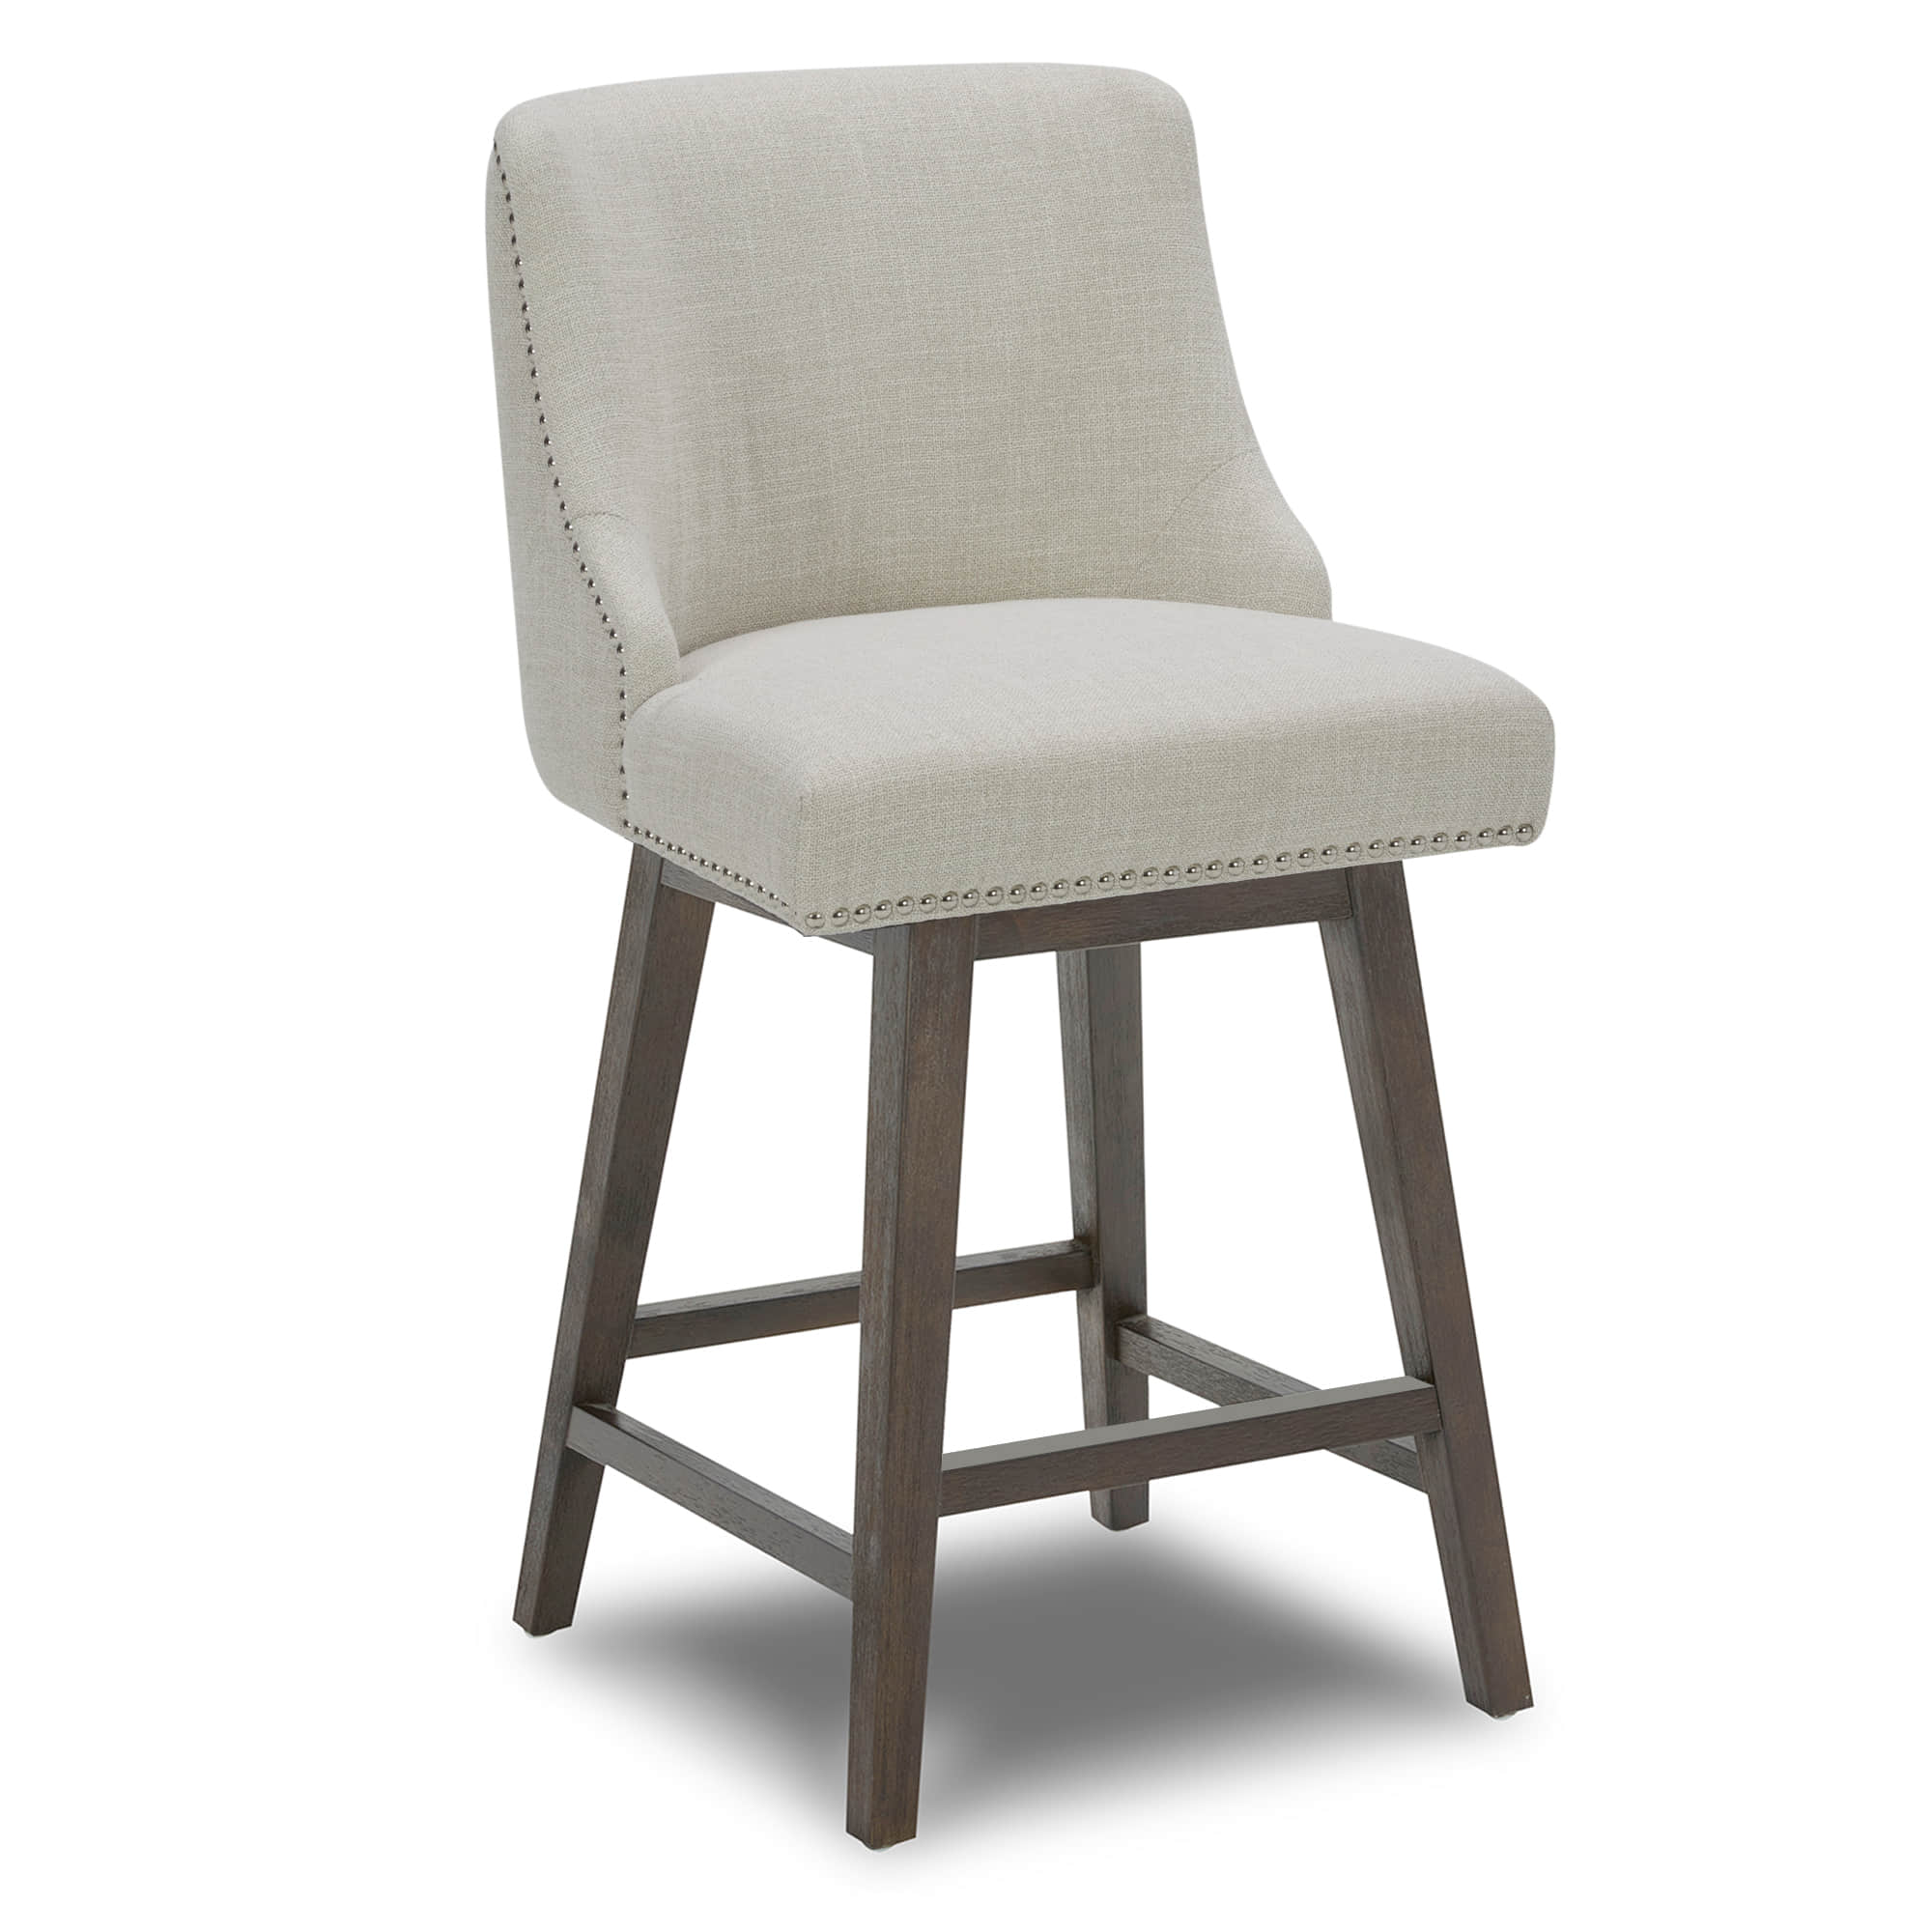 CHITA LIVING-Asher Swivel Counter Stool with Nailhead Trim( Set of 2)-Counter Stools-Fabric-Linen-